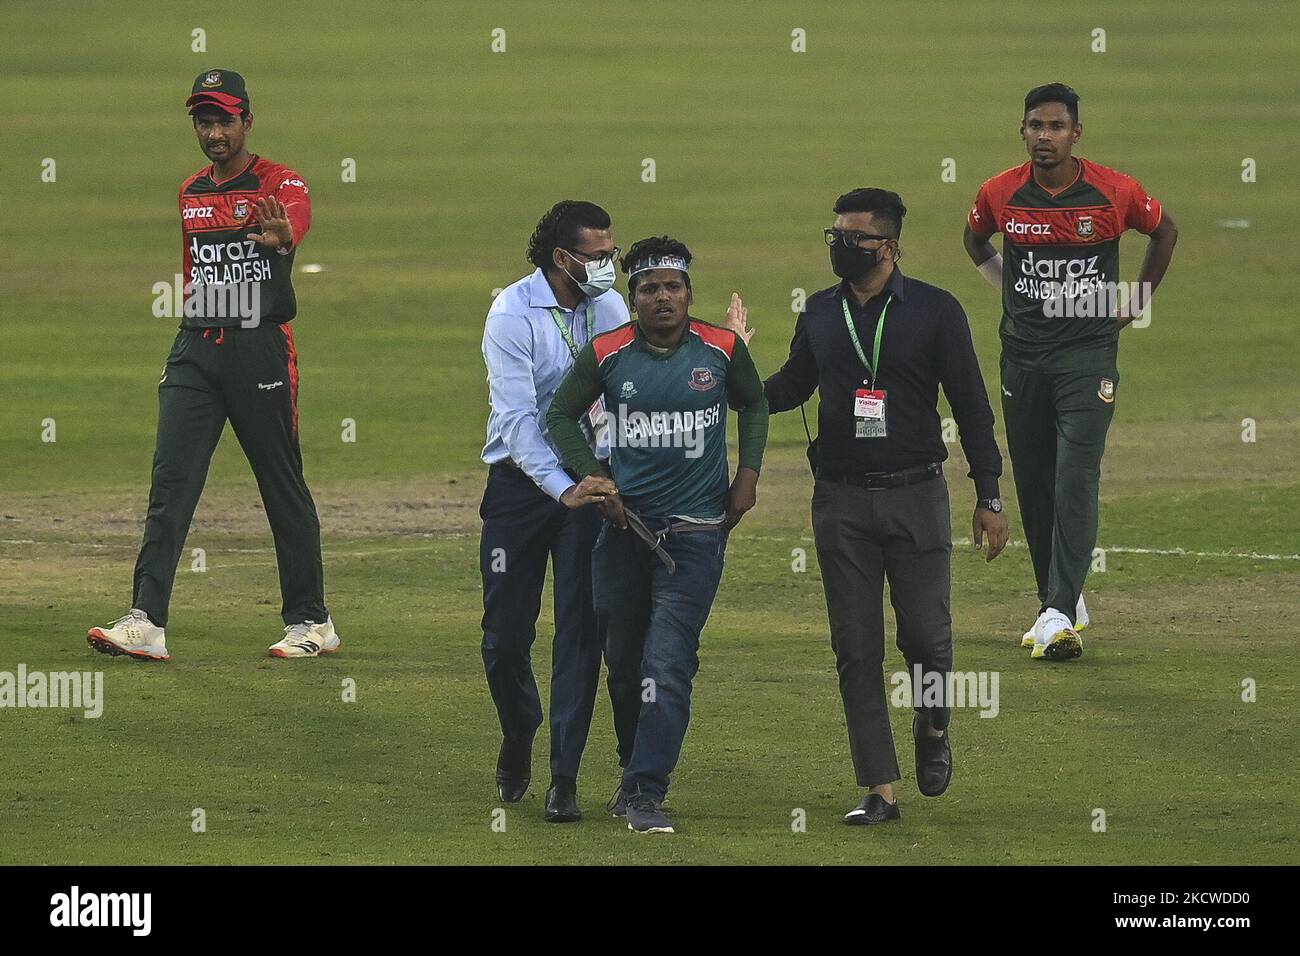 A security official removes a supporter of Bangladesh from the cricket pitch during the second Twenty20 international cricket match between Bangladesh and Pakistan at the Sher-e-Bangla National Cricket Stadium in Dhaka on November 20, 2021. (Photo by Ahmed Salahuddin/NurPhoto) Stock Photo